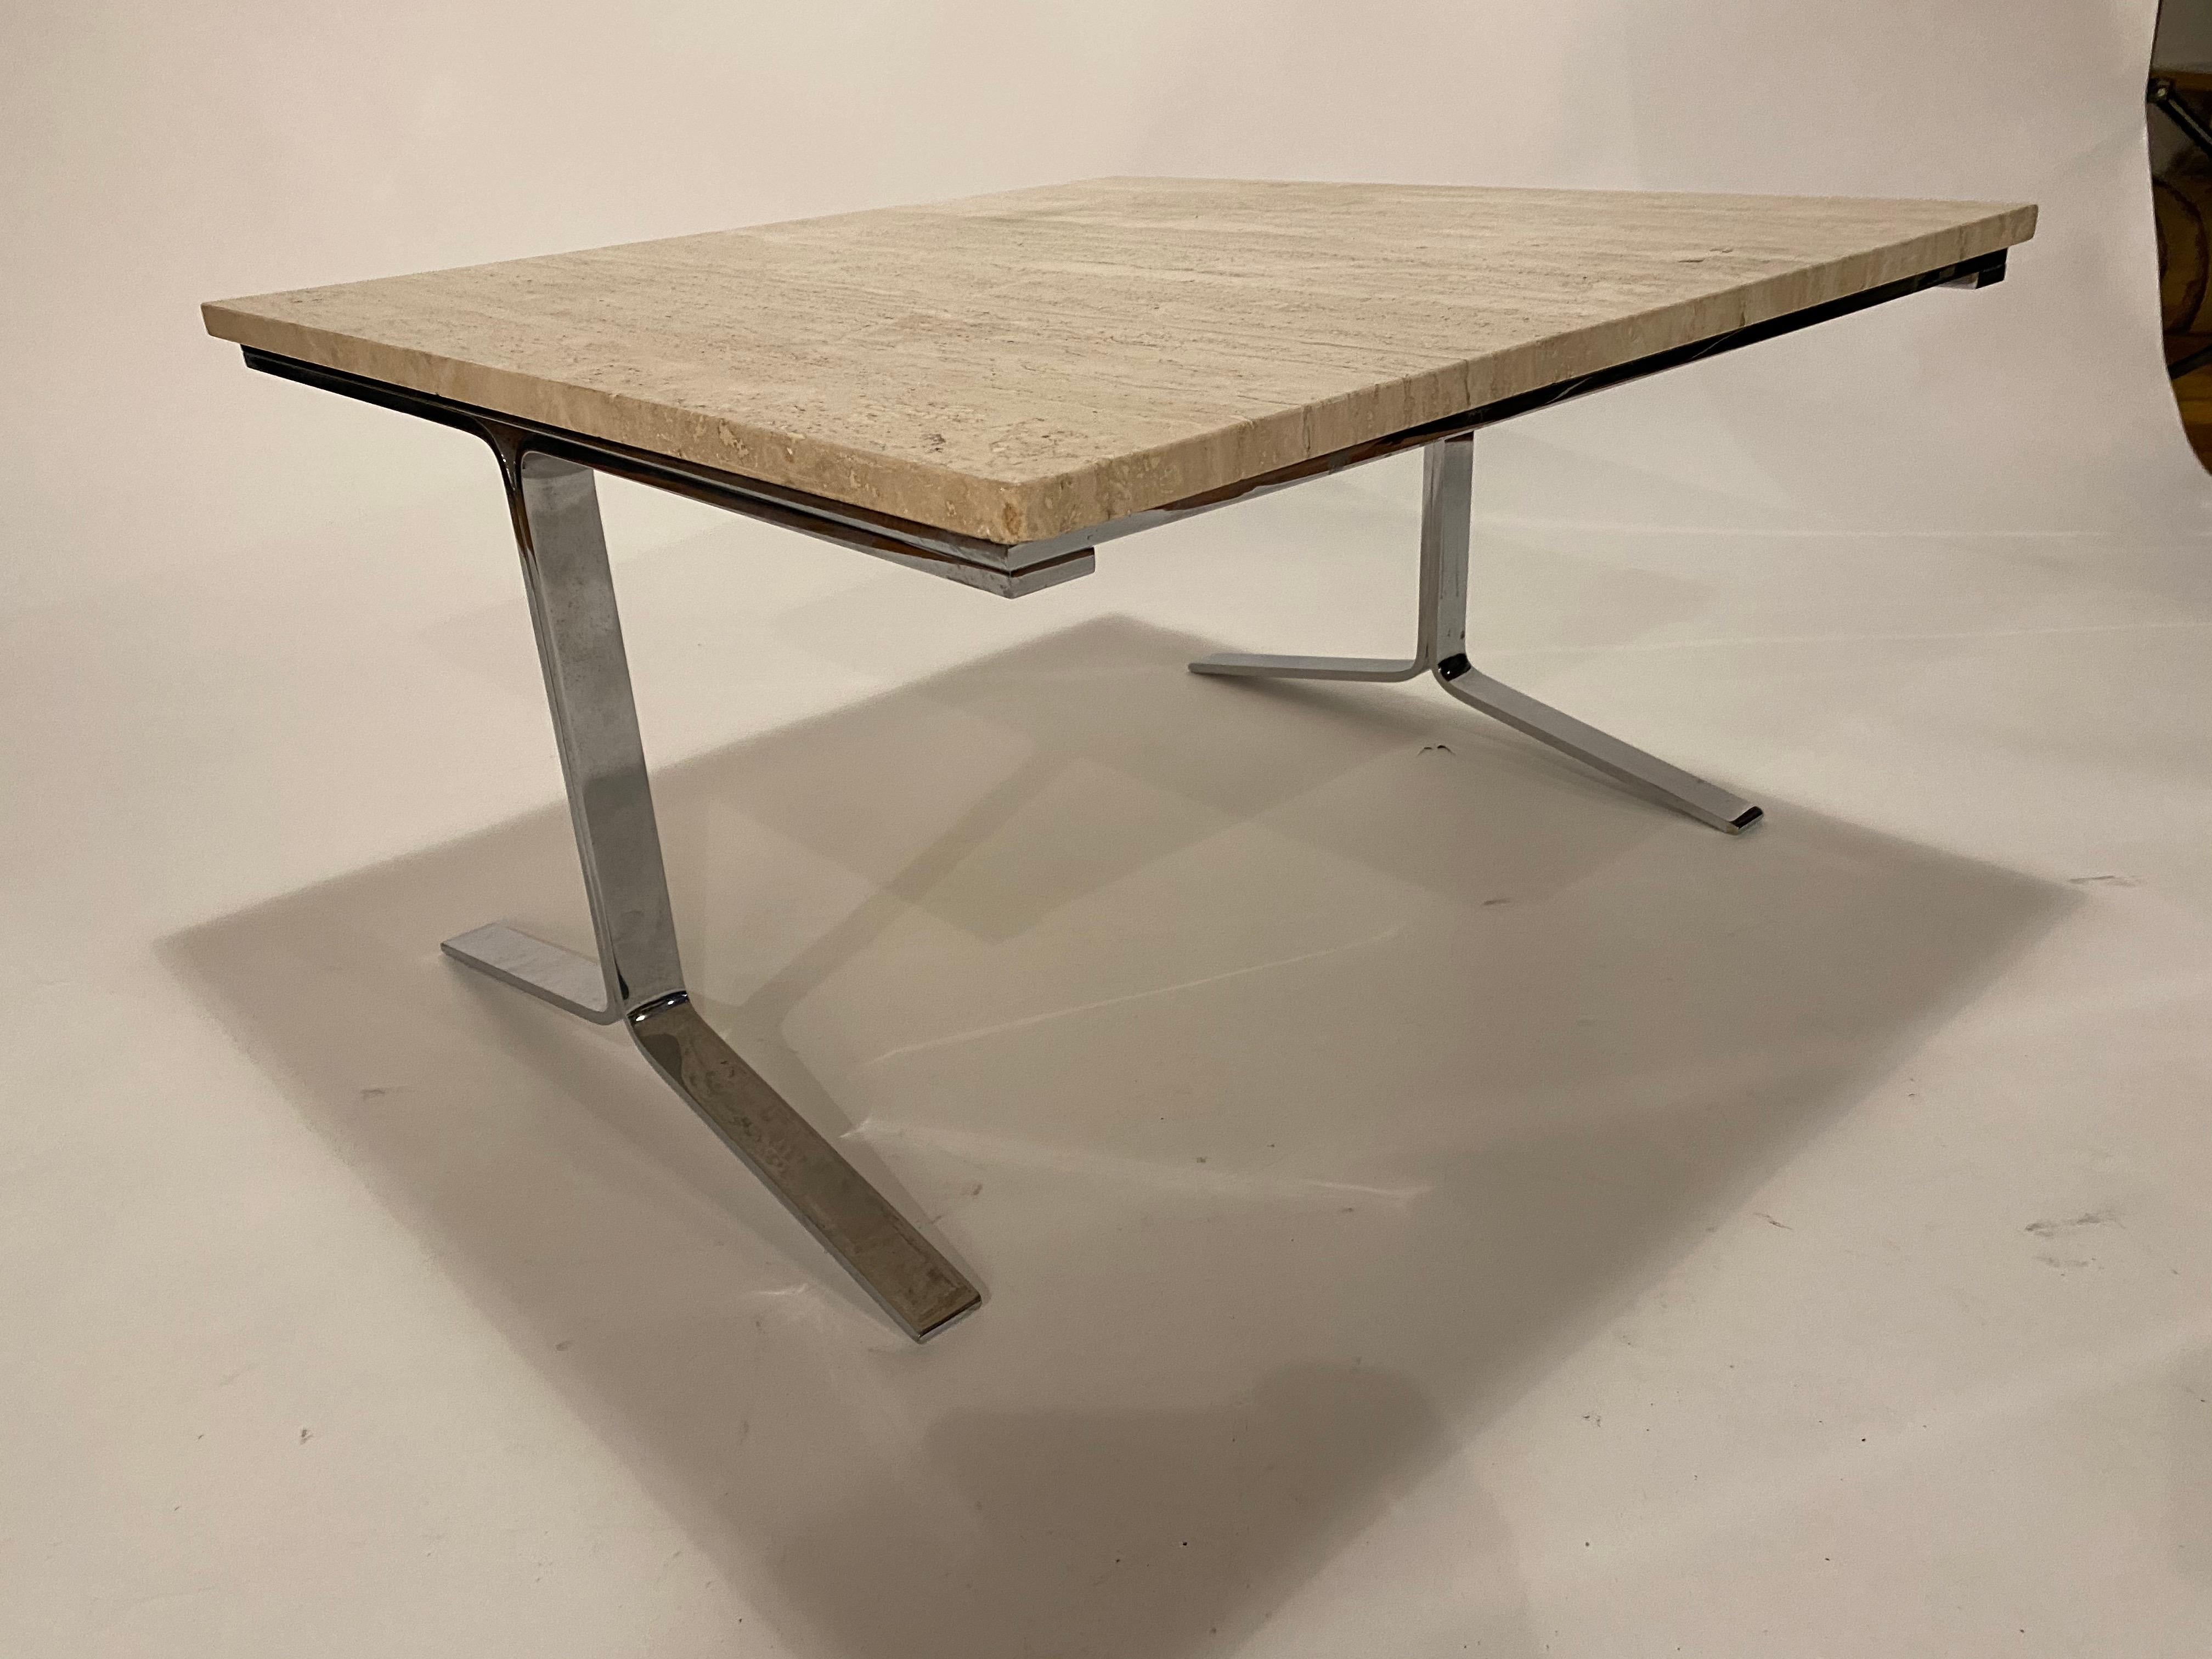 Square cocktail or end table made of polished chrome steel frame and travertine top.